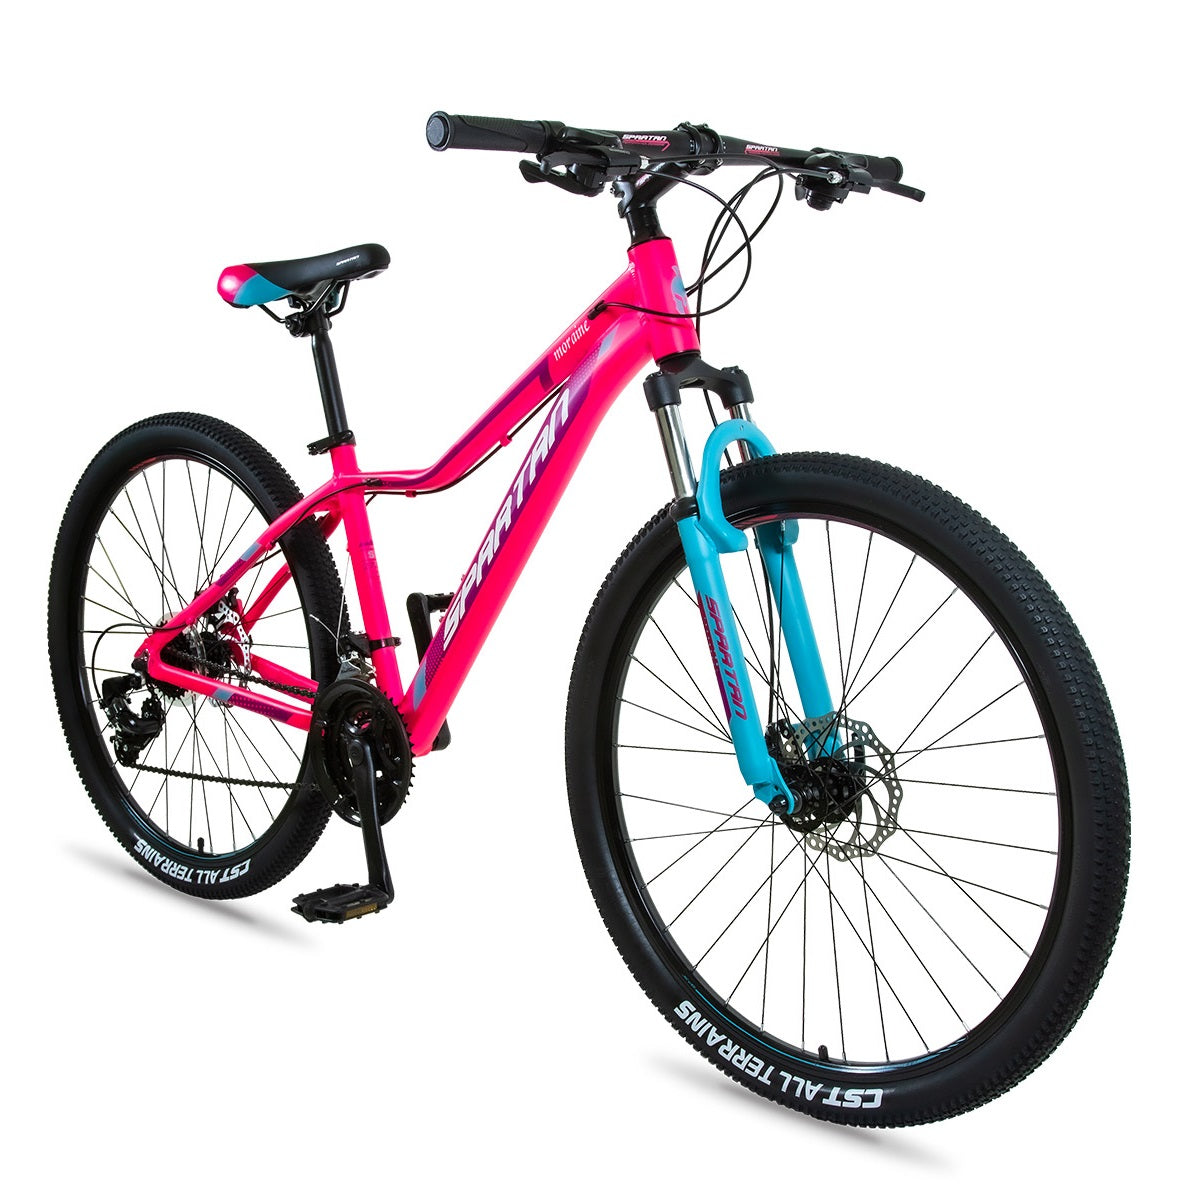 Spartan 27.5" Moraine MTB Alloy Bicycle Pink